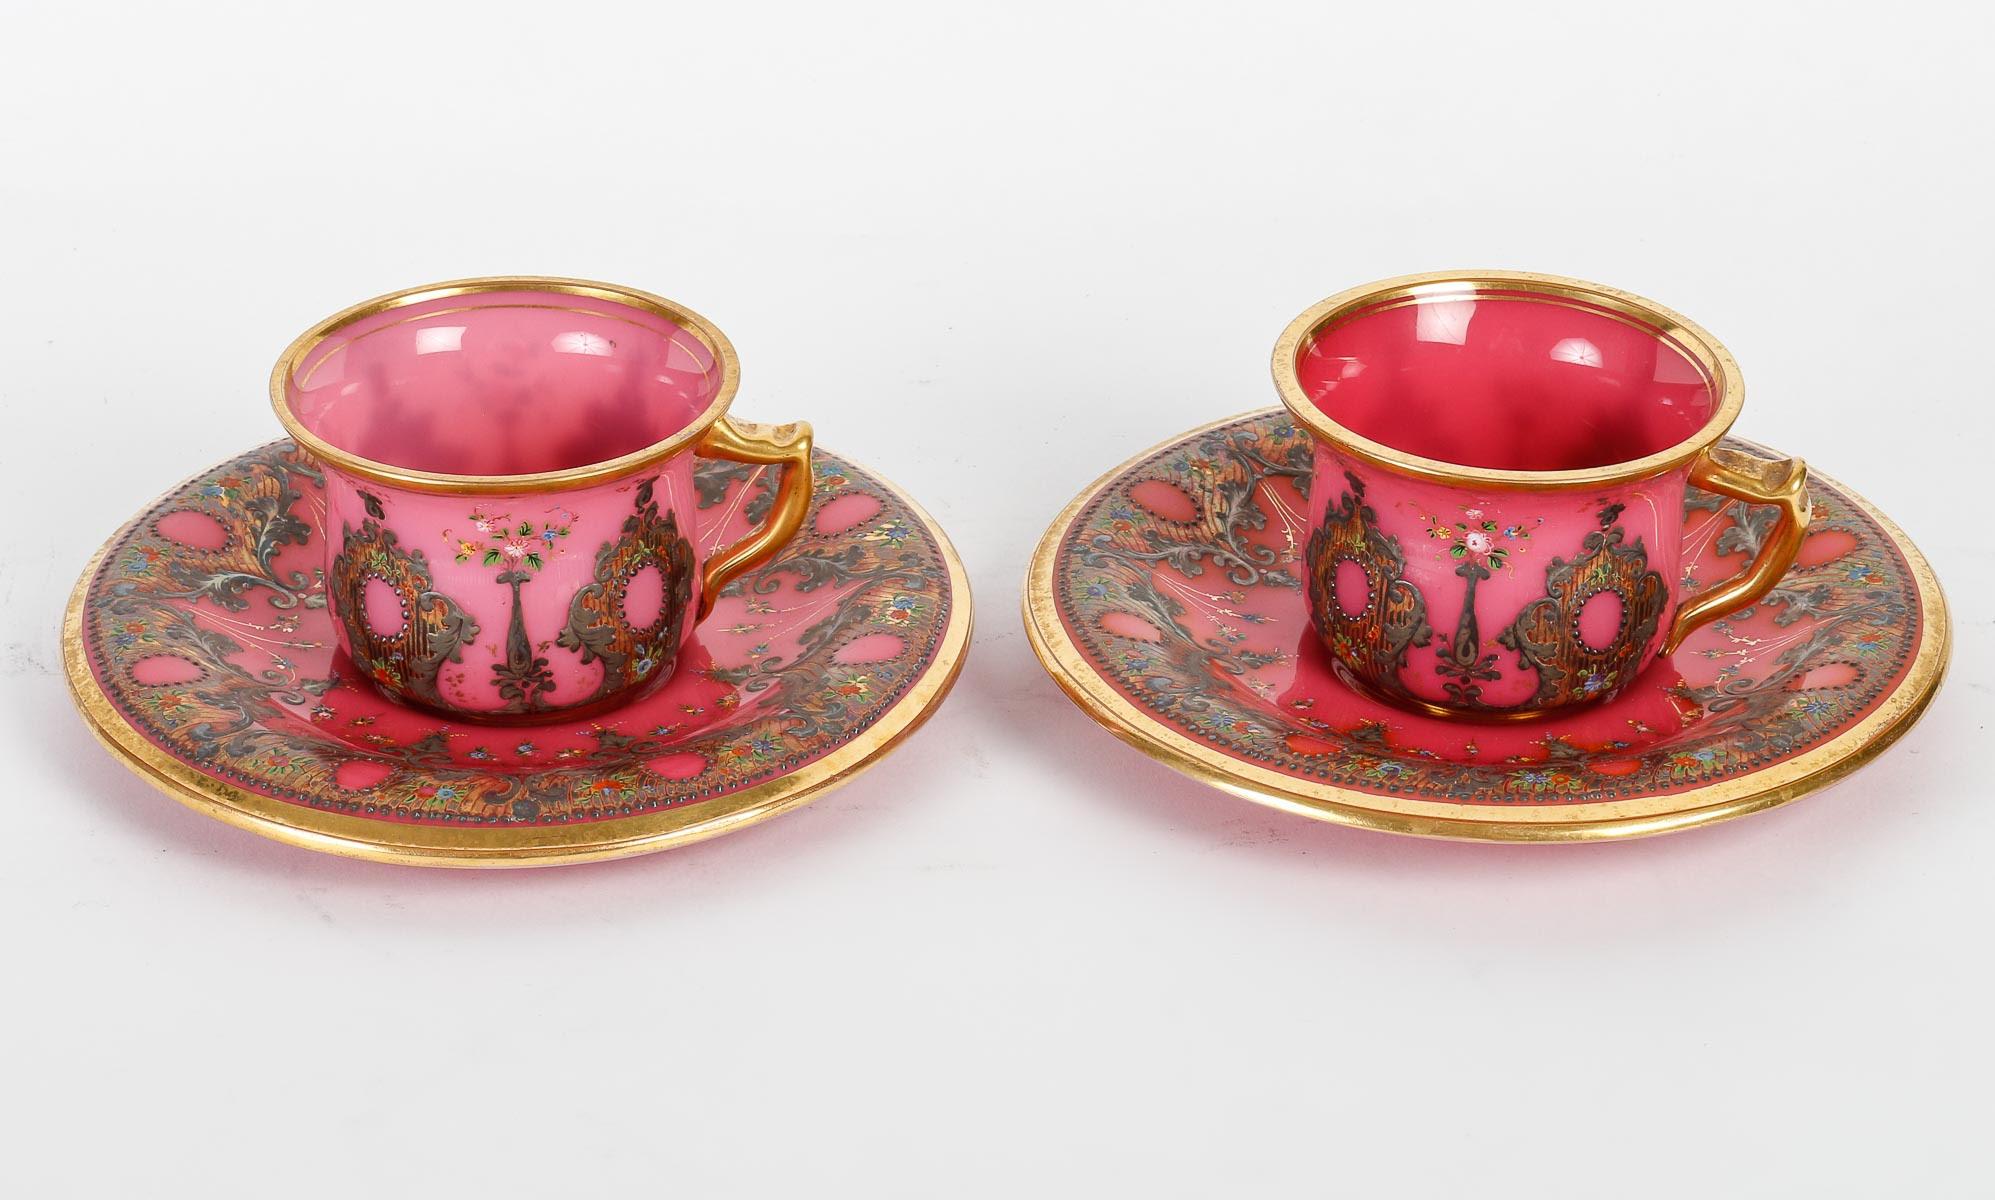 White and Pink Opaline Service Enamelled with Silver and Gold, 19th Century. 6